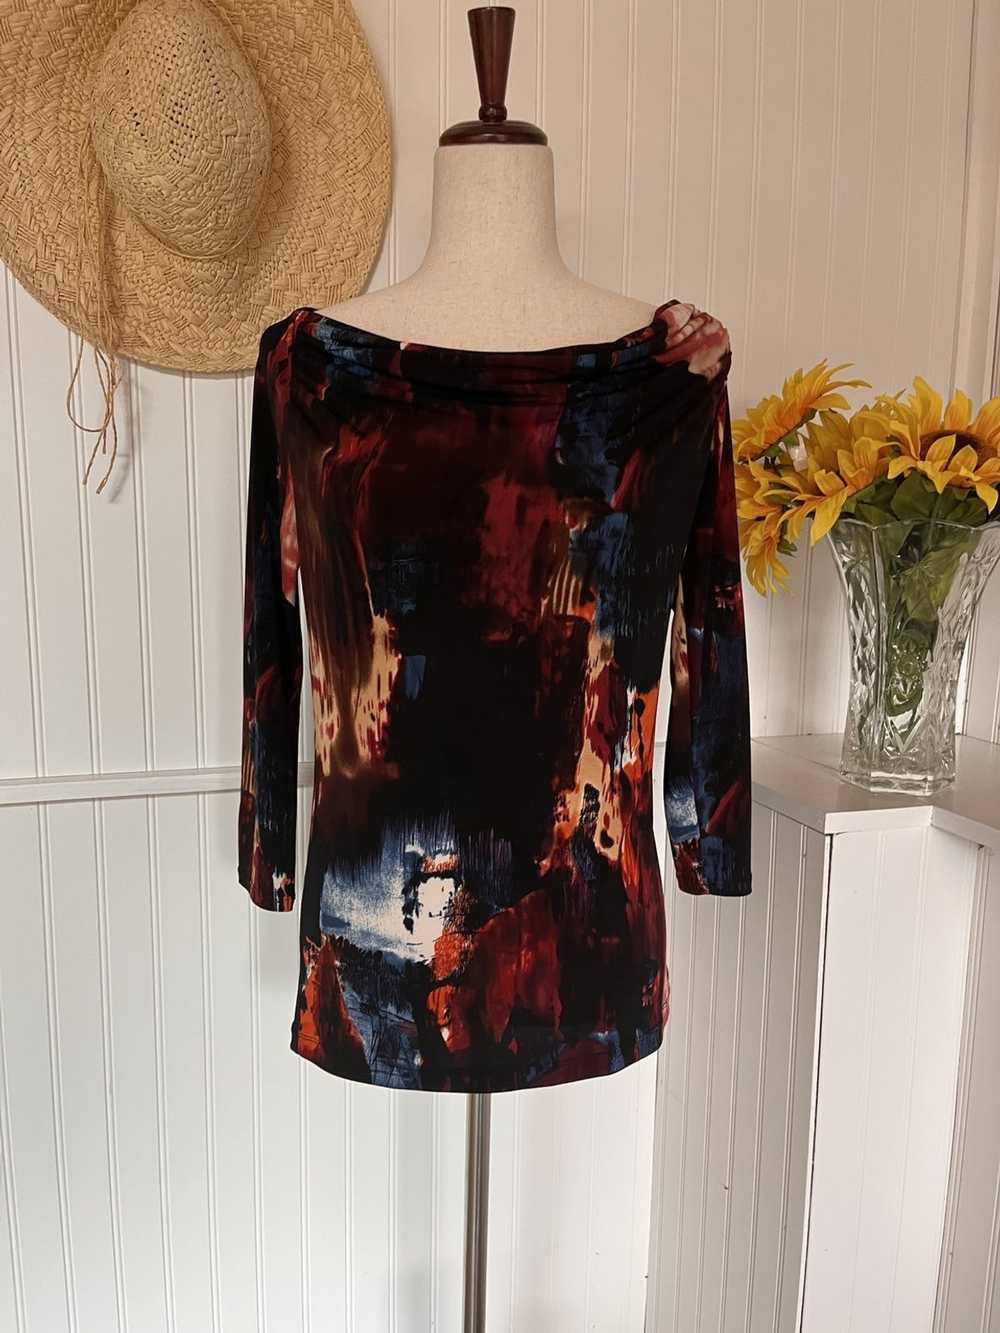 Other Grace Elements Multicolored Blouse Size Sma… - image 8